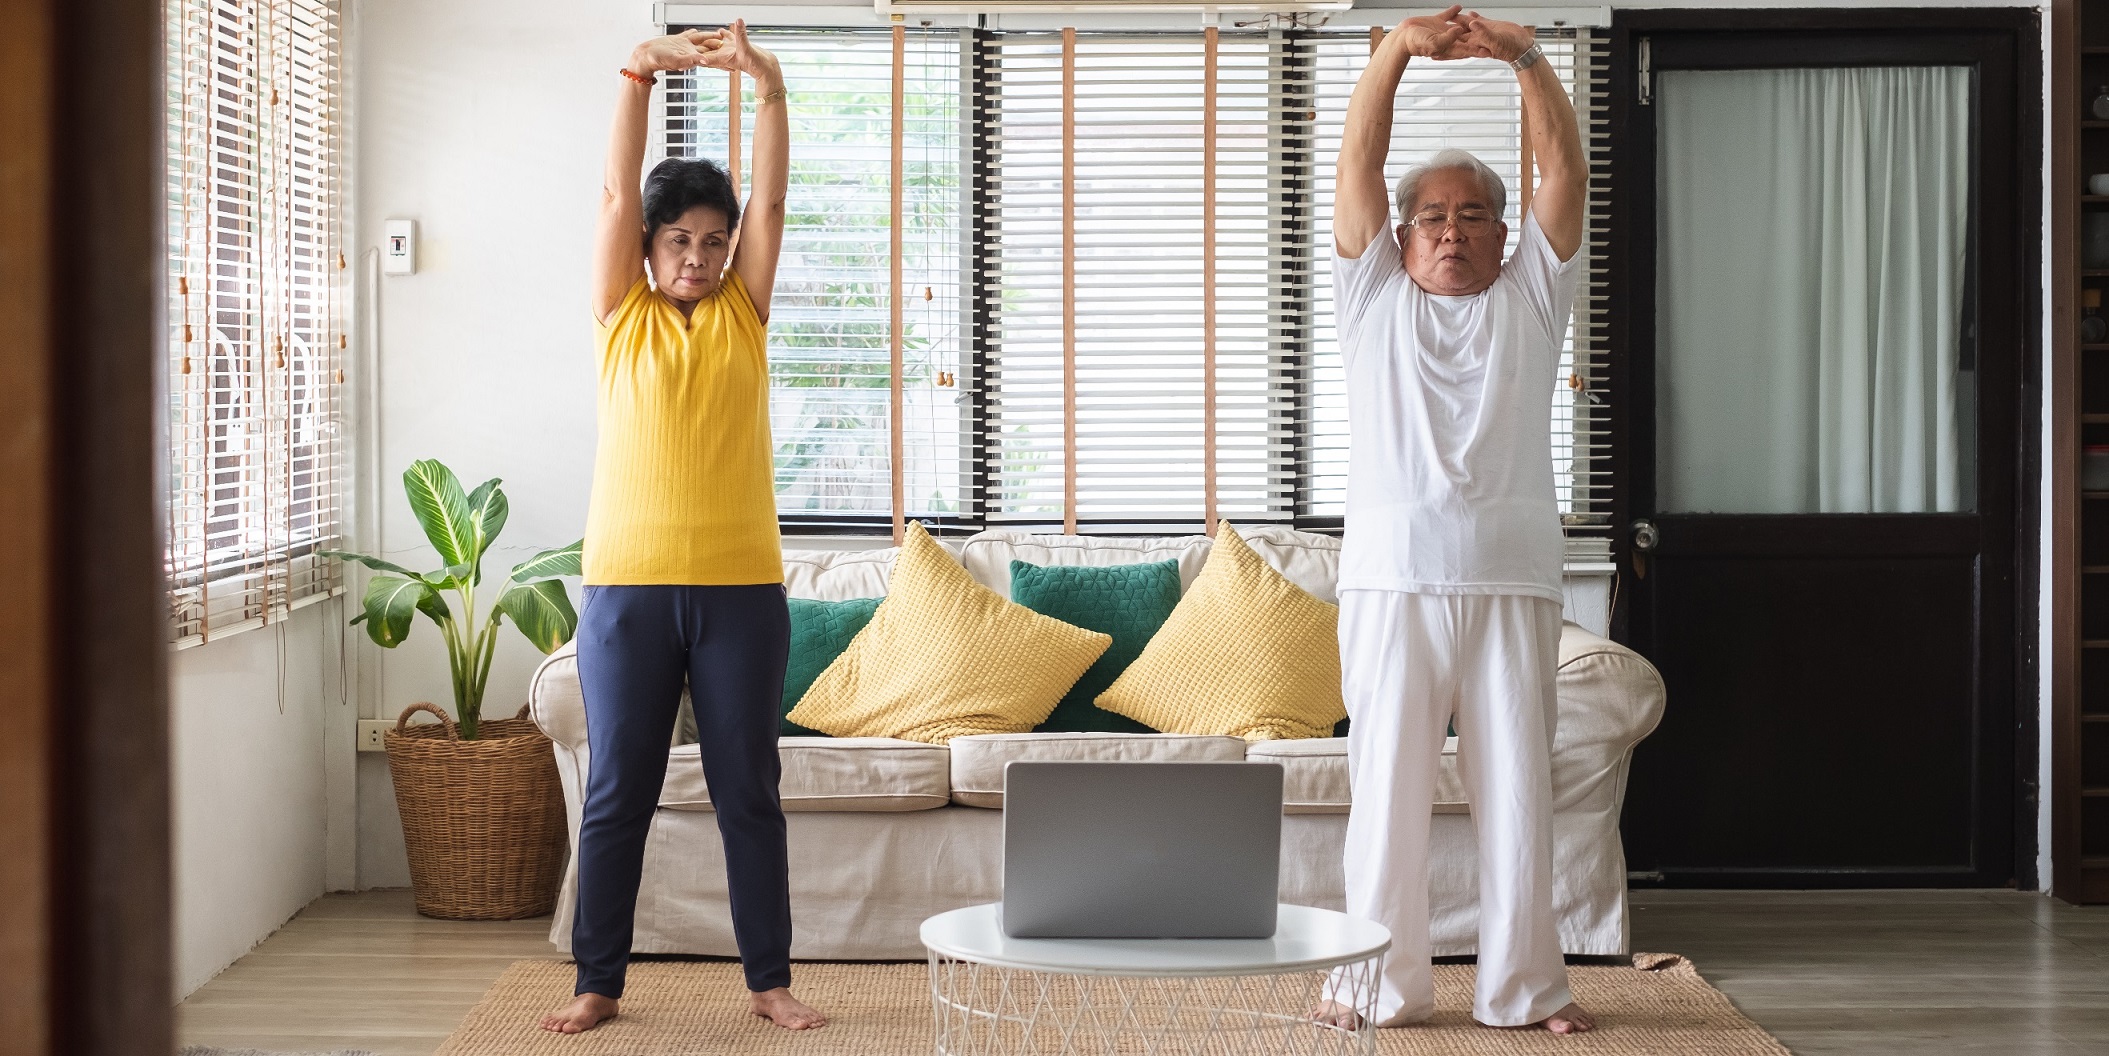 Virtual Tai Chi training improves cognition in old age